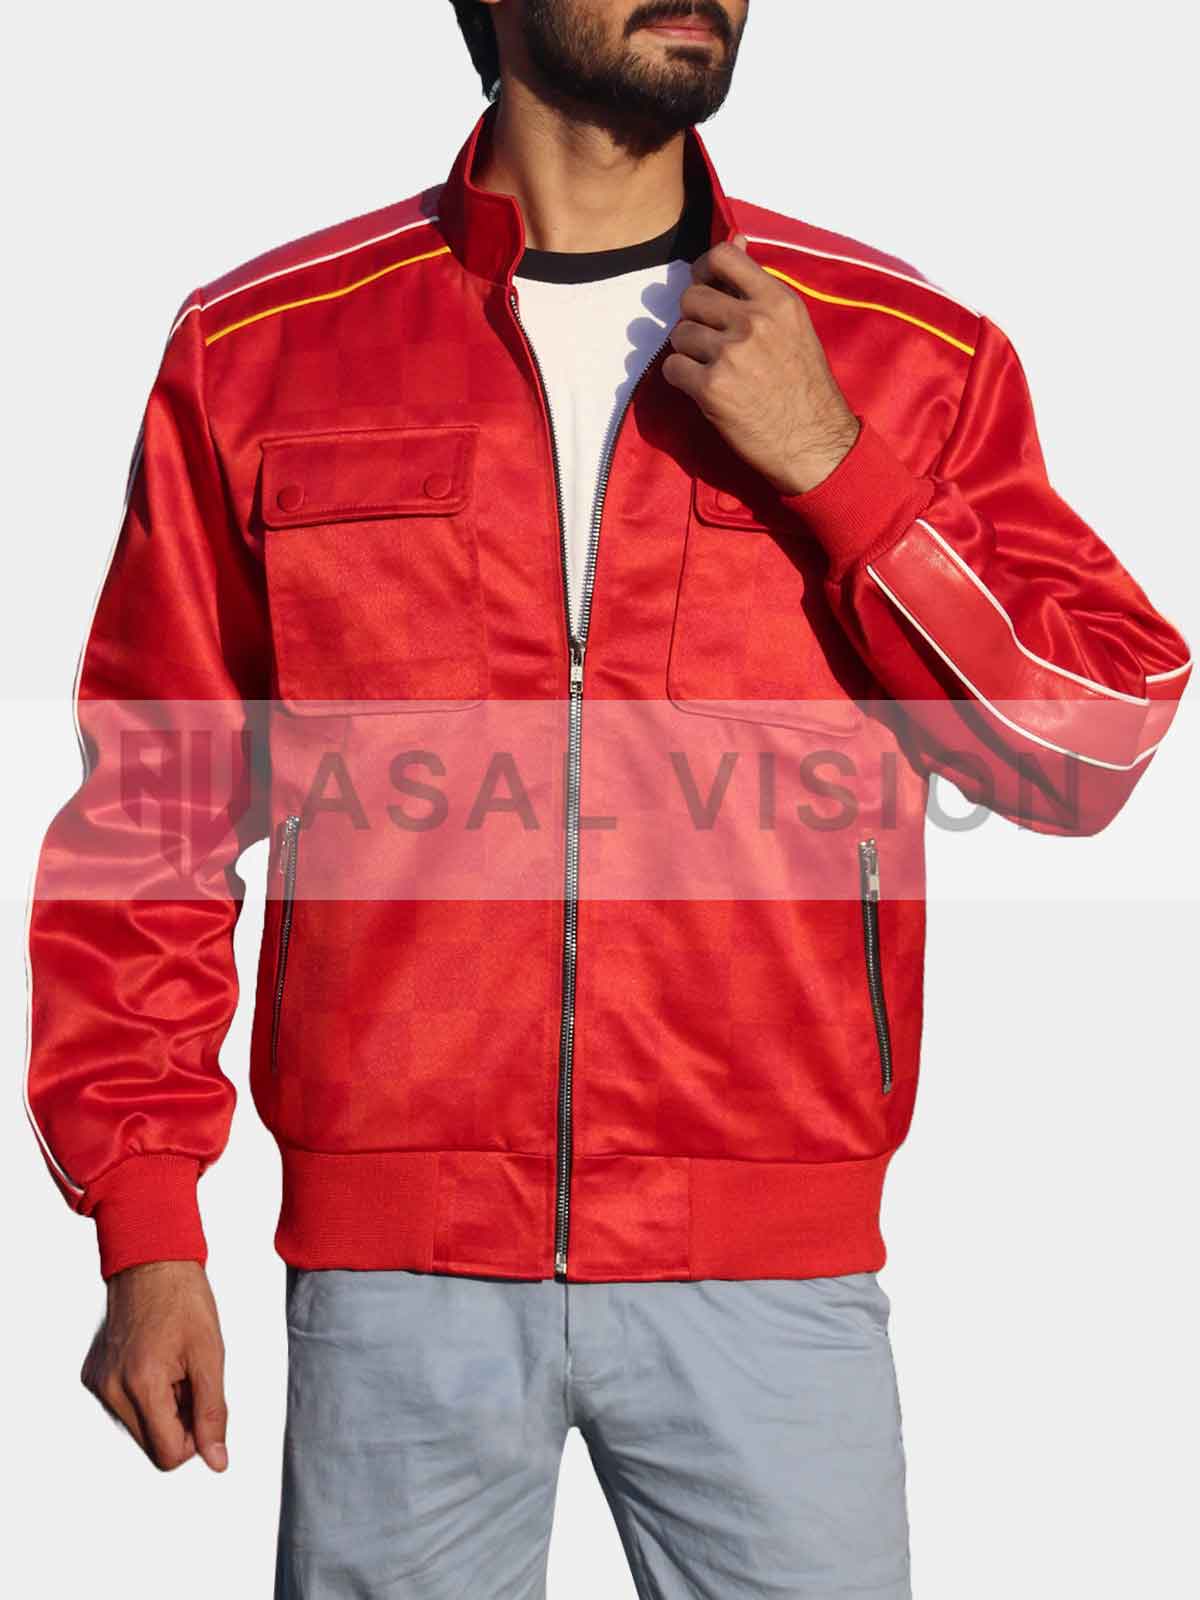 The Fall Guy Ryan Gosling Red Jacket | 100% Handcrafted - Asal Vision